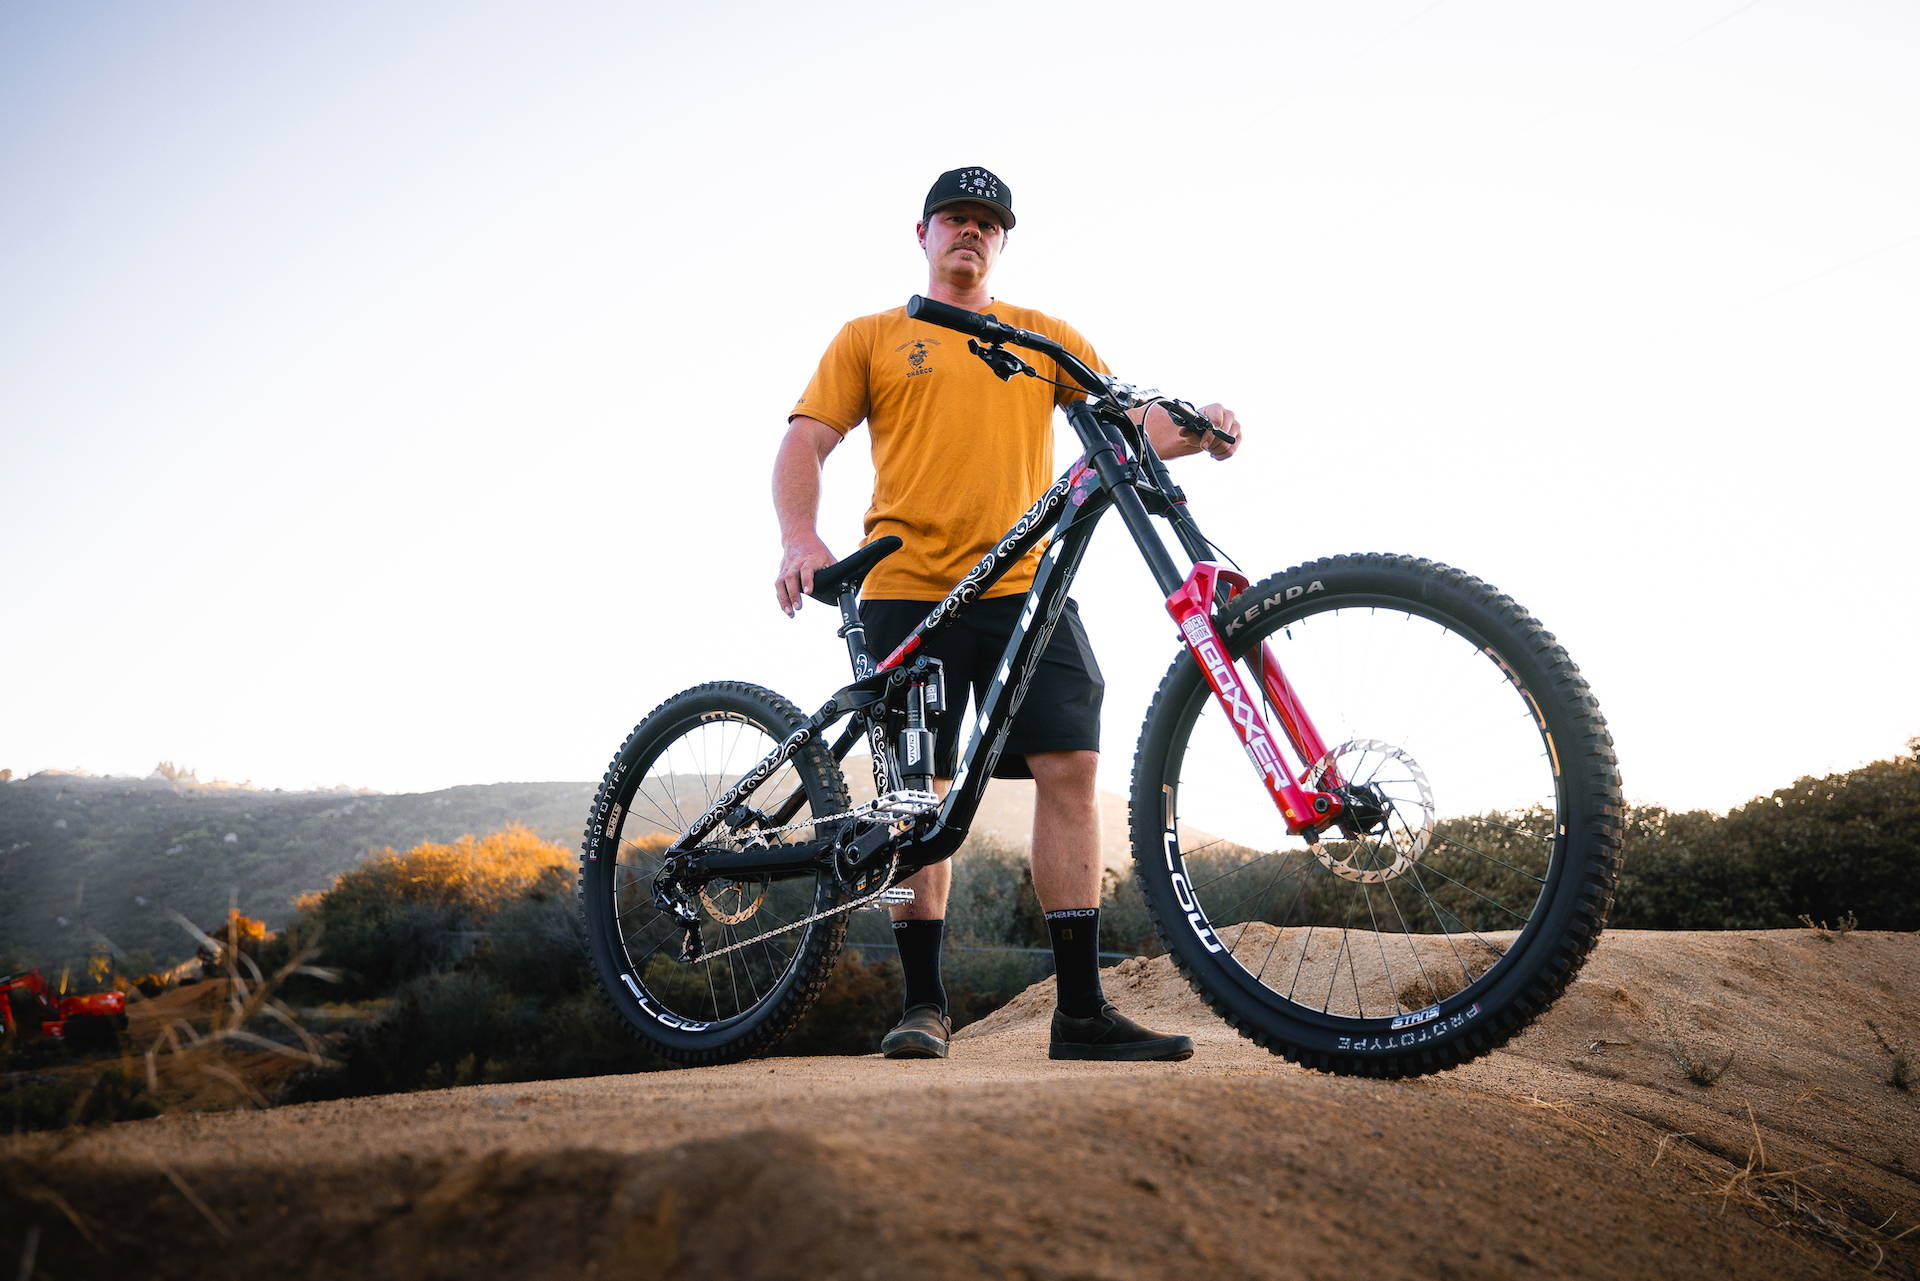 Kyle Strait with his custom VT-01 downhill bike built for Red Bull Rampage 2023 